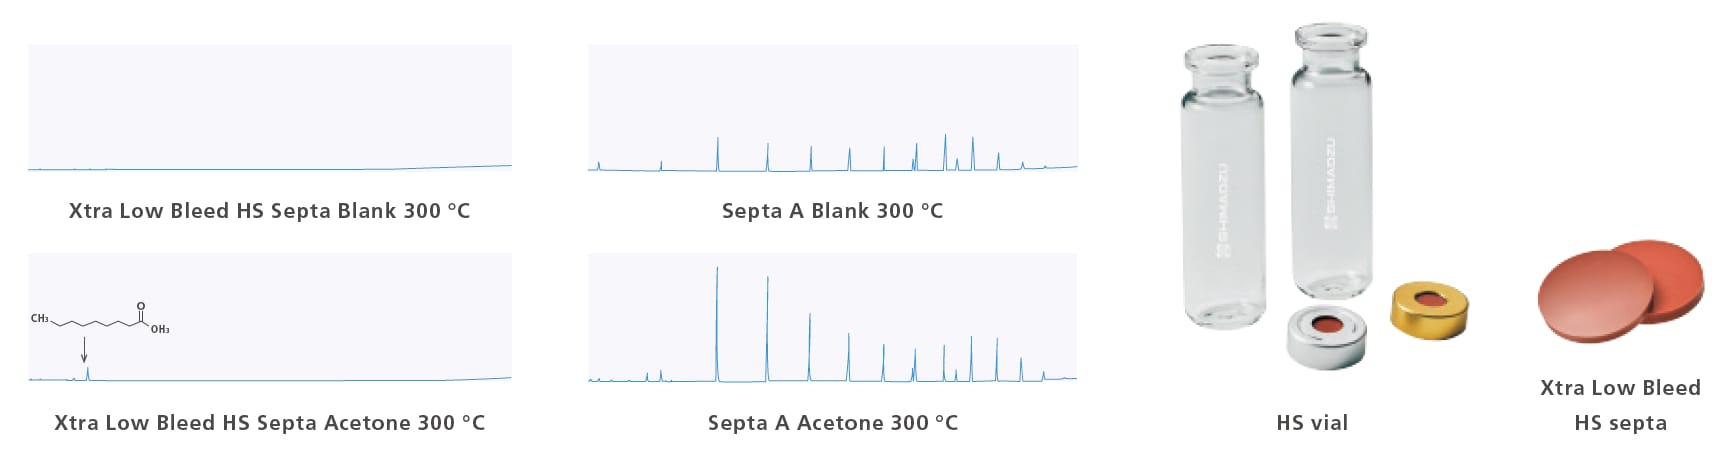 Analysis Comparison of Xtra Low Bleed HS Septa and Septa A